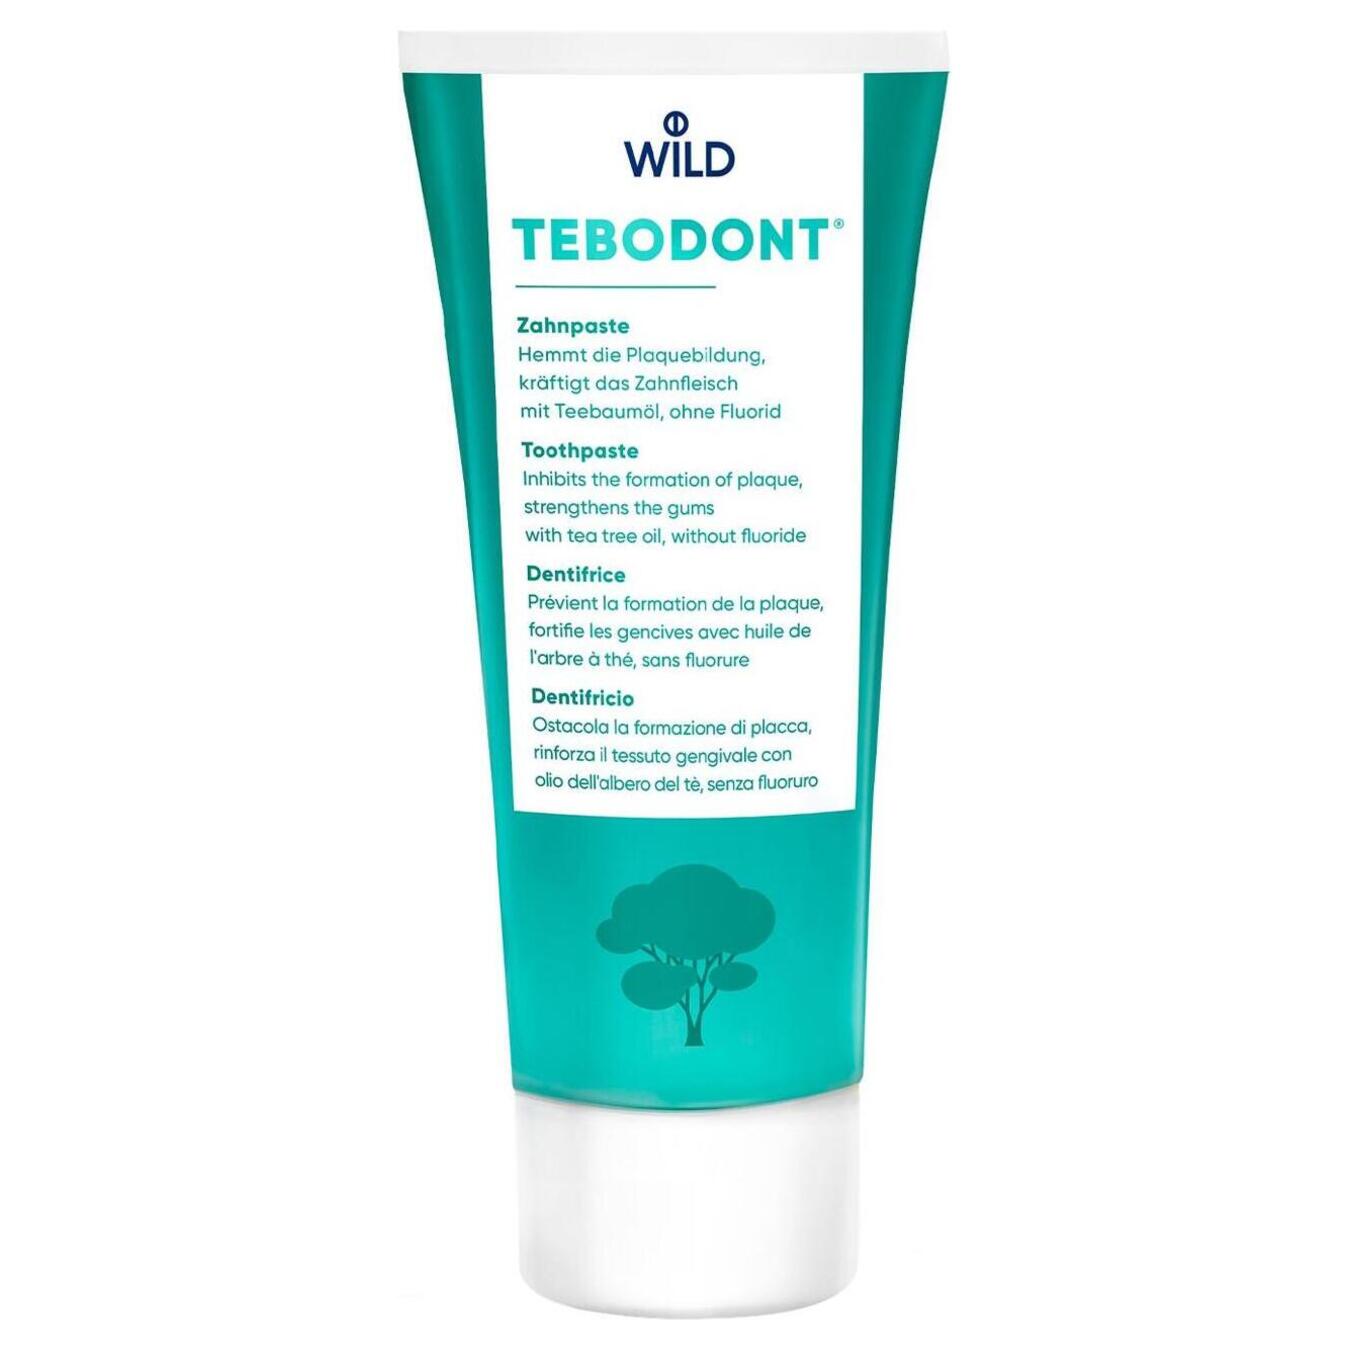 Tebodont toothpaste with tea tree oil (0.75%) with fluoride